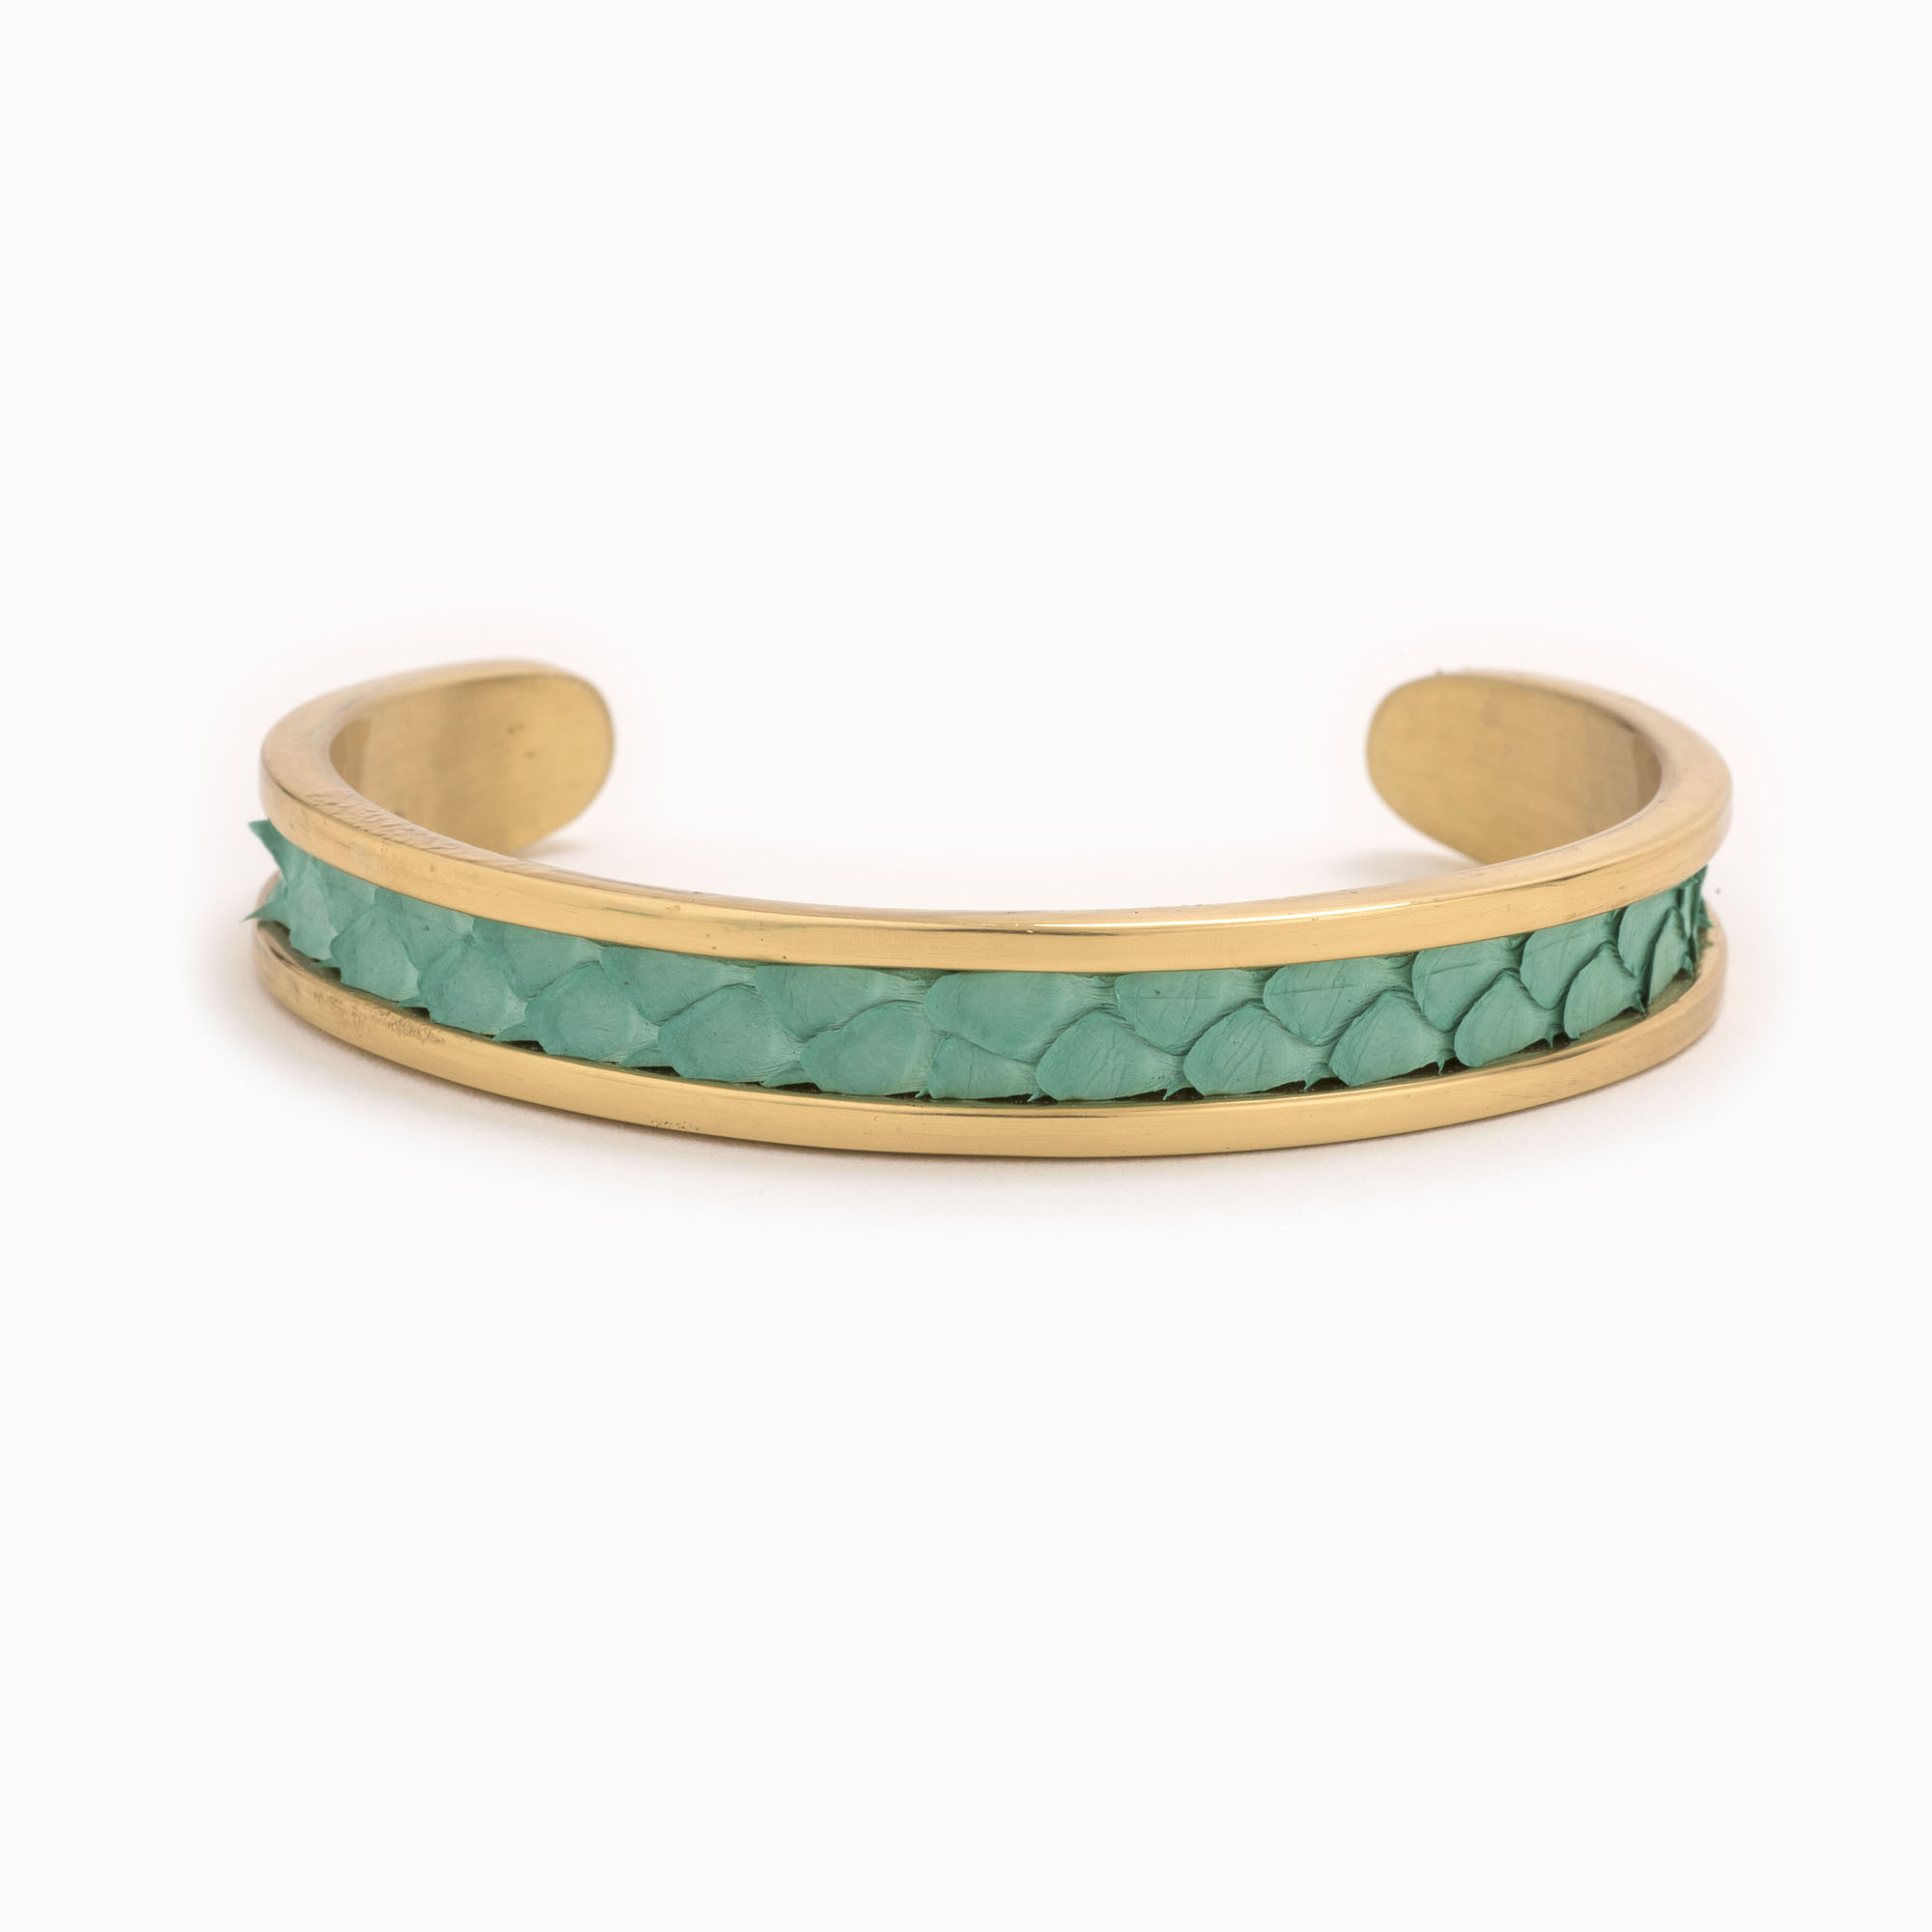 Featured image for “Small Turquoise Gold Cuff”